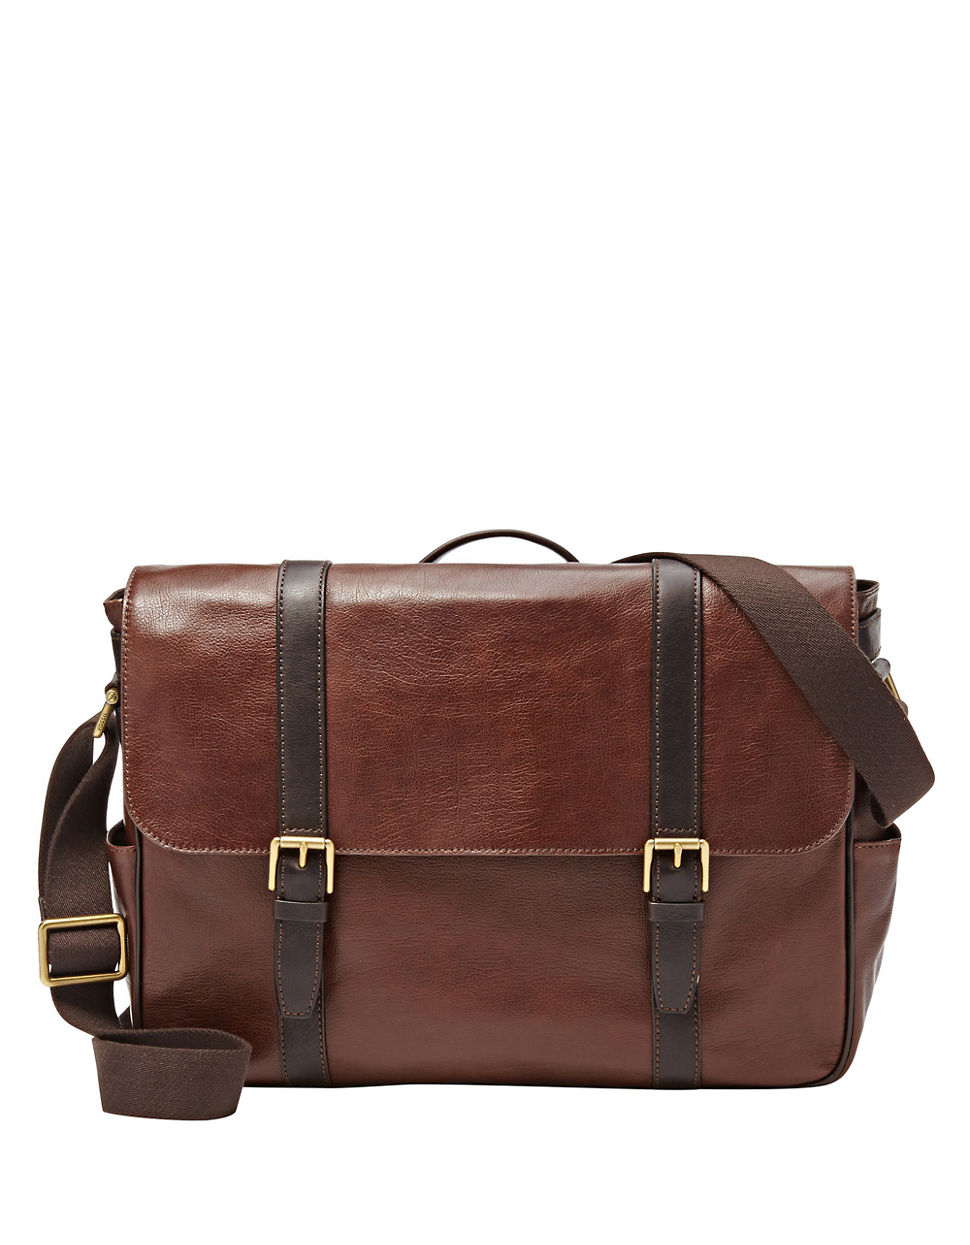 Fossil Leather Messenger Bag in Brown for Men - Lyst